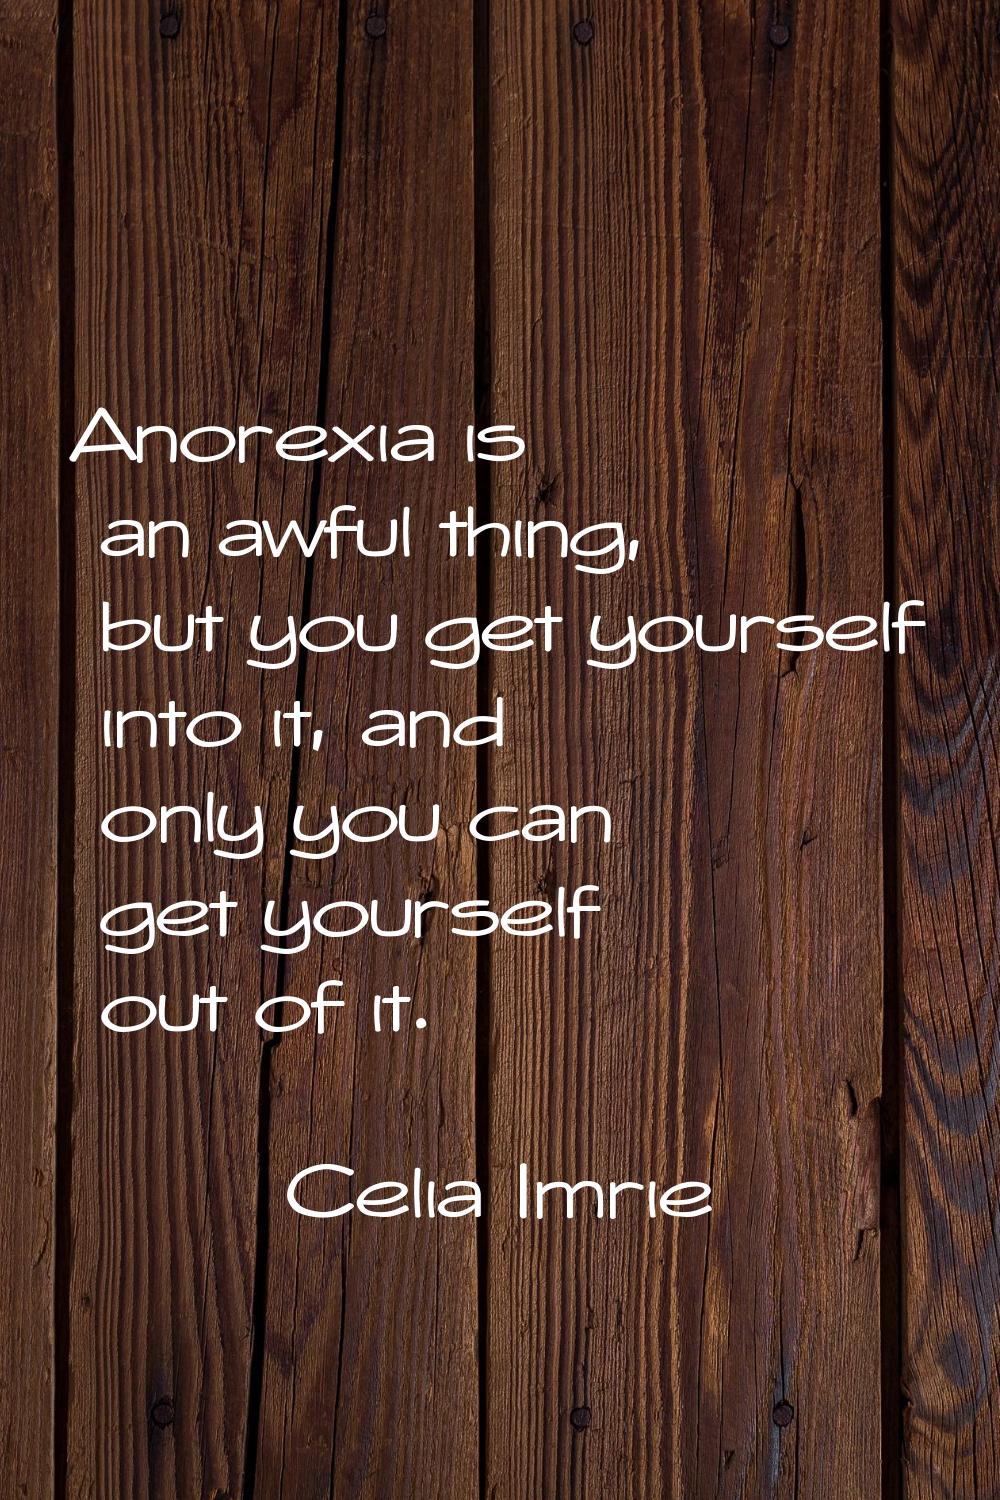 Anorexia is an awful thing, but you get yourself into it, and only you can get yourself out of it.